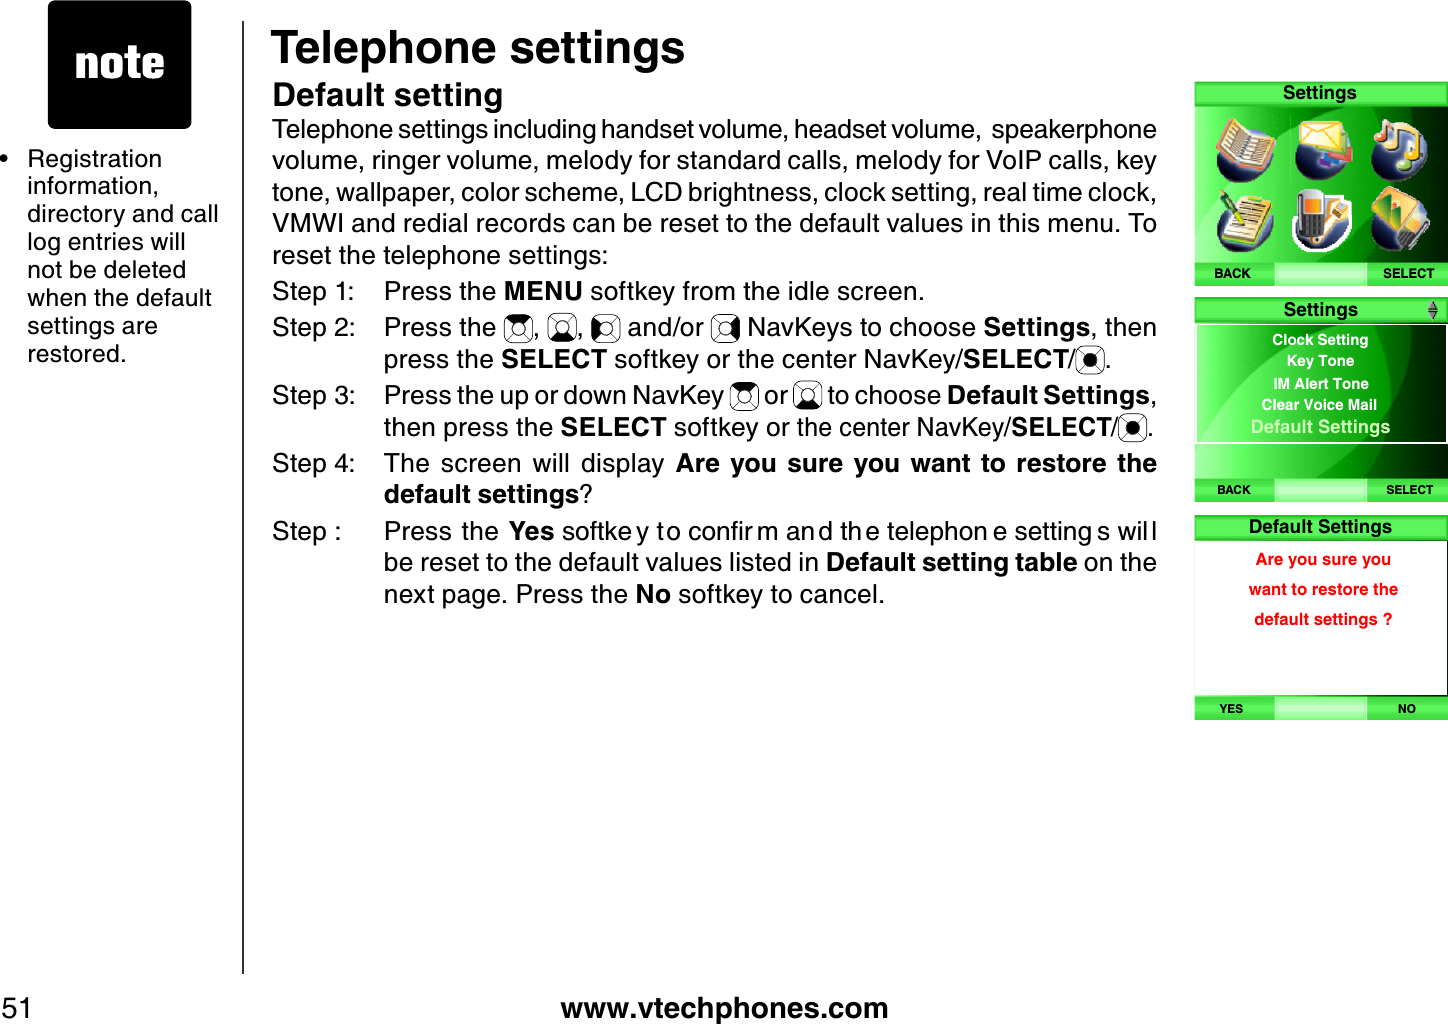 www.vtechphones.com51Telephone settingsDefault settingTelephone settings including handset volume, headset volume,  speakerphone volume, ringer volume, melody for standard calls, melody for VoIP calls, key tone, wallpaper, color scheme, LCD brightness, clock setting, real time clock, VMWI and redial records can be reset to the default values in this menu. To reset the telephone settings:Step 1: Press the MENU softkey from the idle screen.Step 2: Press the  , ,  and/or   NavKeys to choose Settings, then press the SELECT softkey or the center NavKey/SELECT/.Step 3: Press the up or down NavKey   or   to choose Default Settings,then press the SELECT softkey or the center NavKey/SELECT/ .Step 4: The  screen  will  display  Are you  sure  you  want  to  restore  the d efault settings?Step : Press the YesUQHVMG [VQEQPſT OCP FVJ GVGNGRJQP GUGVVKPI UYKN Nbe reset to the default values listed in Default setting tab le on the next page. Press the No softkey to cancel.Registration information, directory and call log entries will not be deleted when the default settings are restored.•SELECTSettingsBACKBACK SELECTClock Setting IM Alert ToneClear Voice Mail Default SettingsKey ToneSettingsHandset will bederegistered.Are you sure?YES NODefault SettingsAre you sure youwant to restore the default settings ?